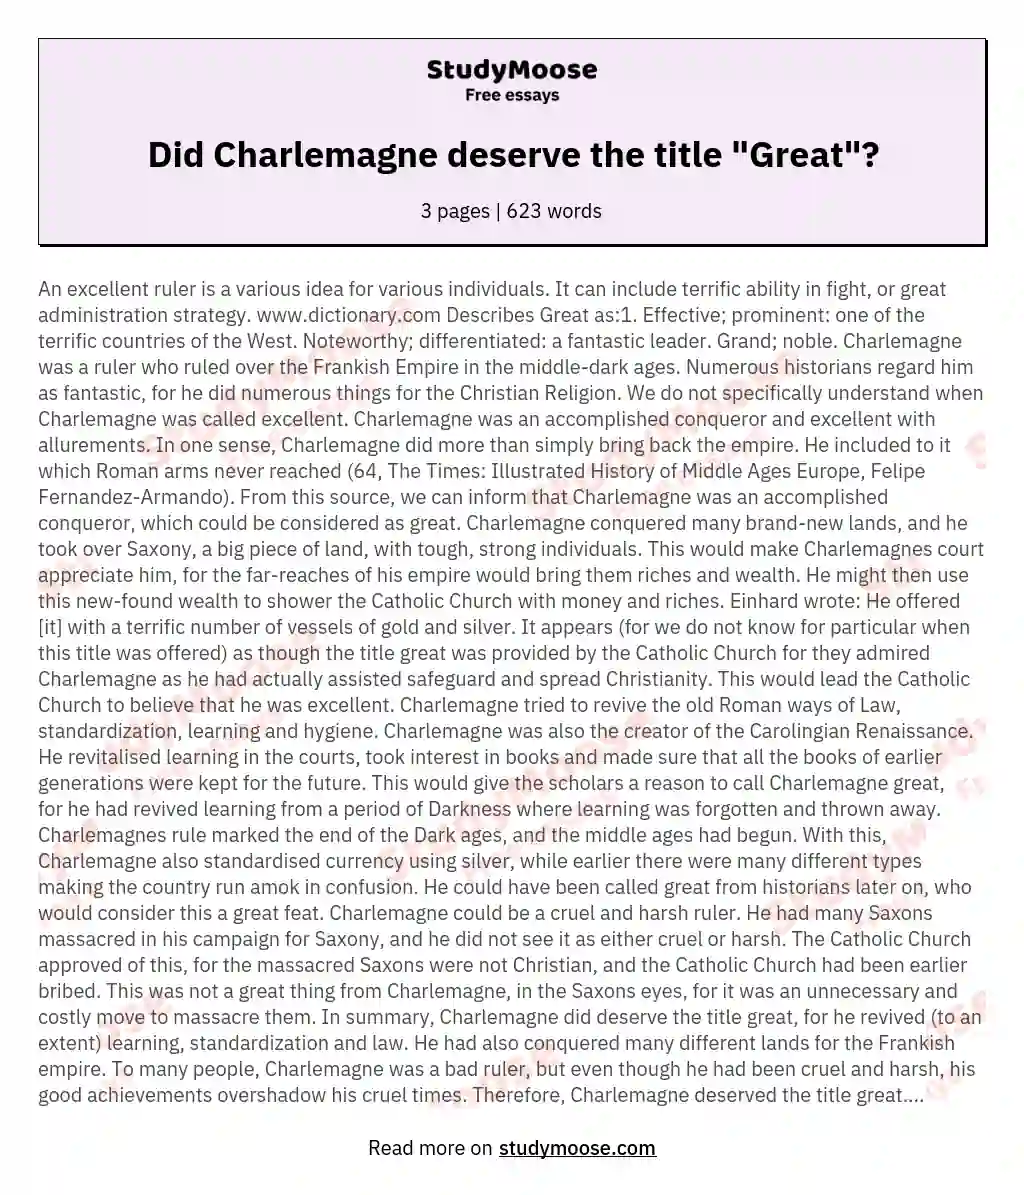 Did Charlemagne deserve the title "Great"?